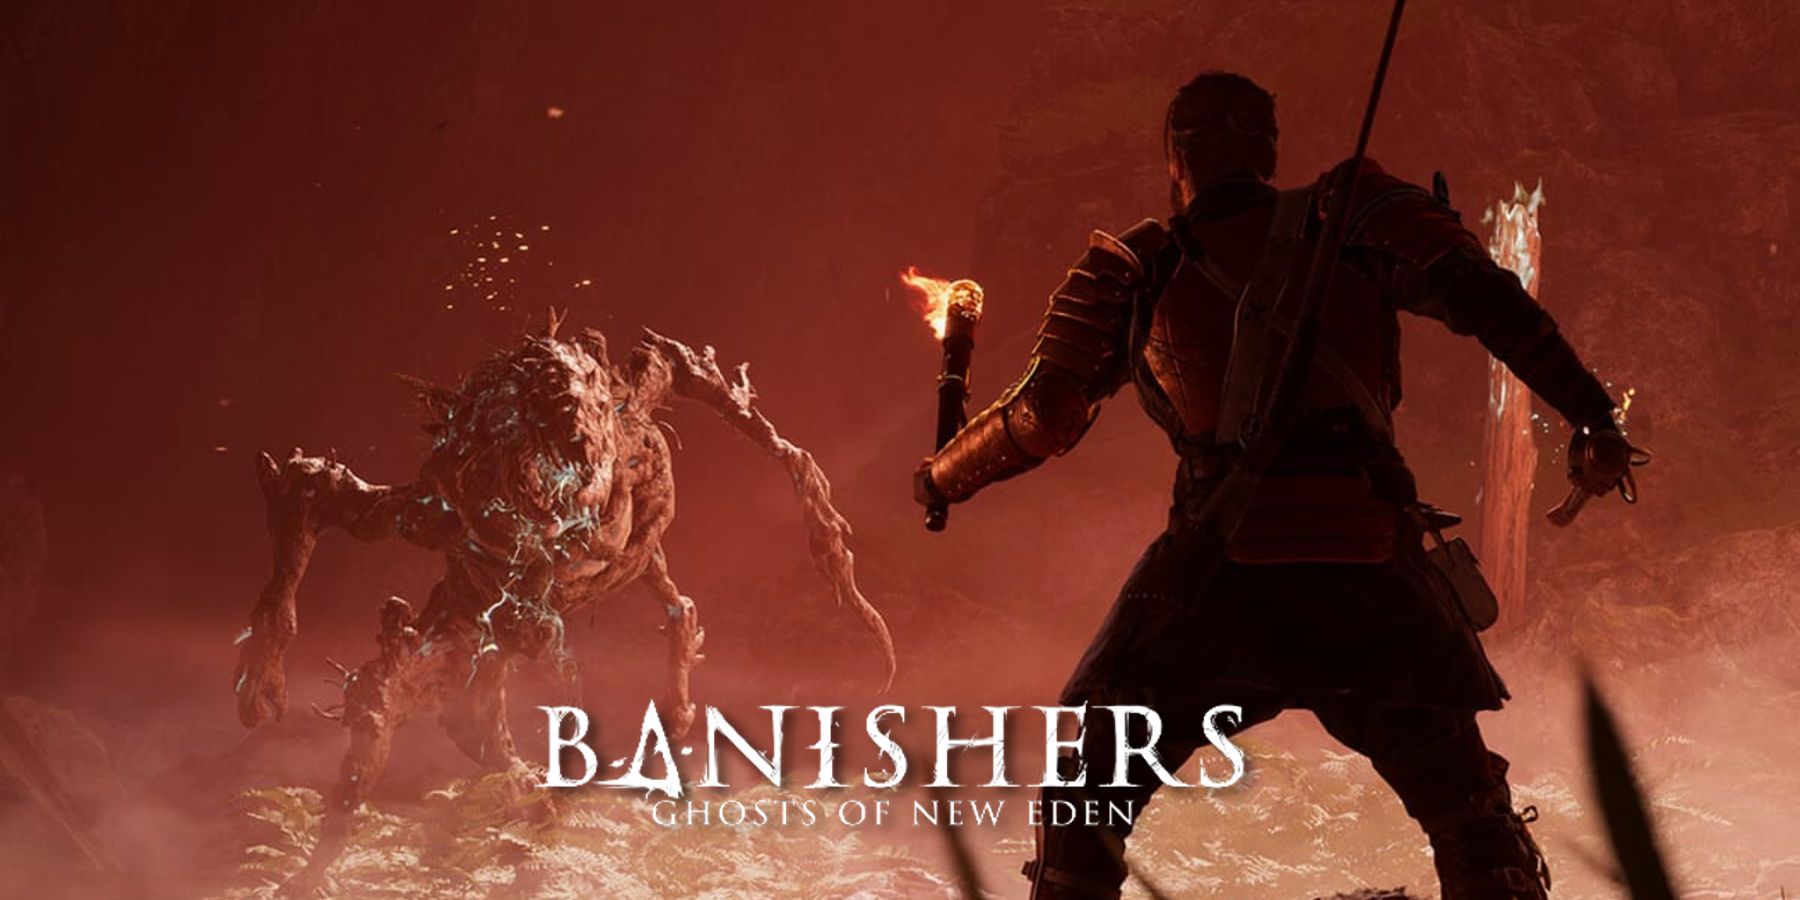 Banishers- Ghosts of New Eden Players Shouldn't Sleep on its Scourges